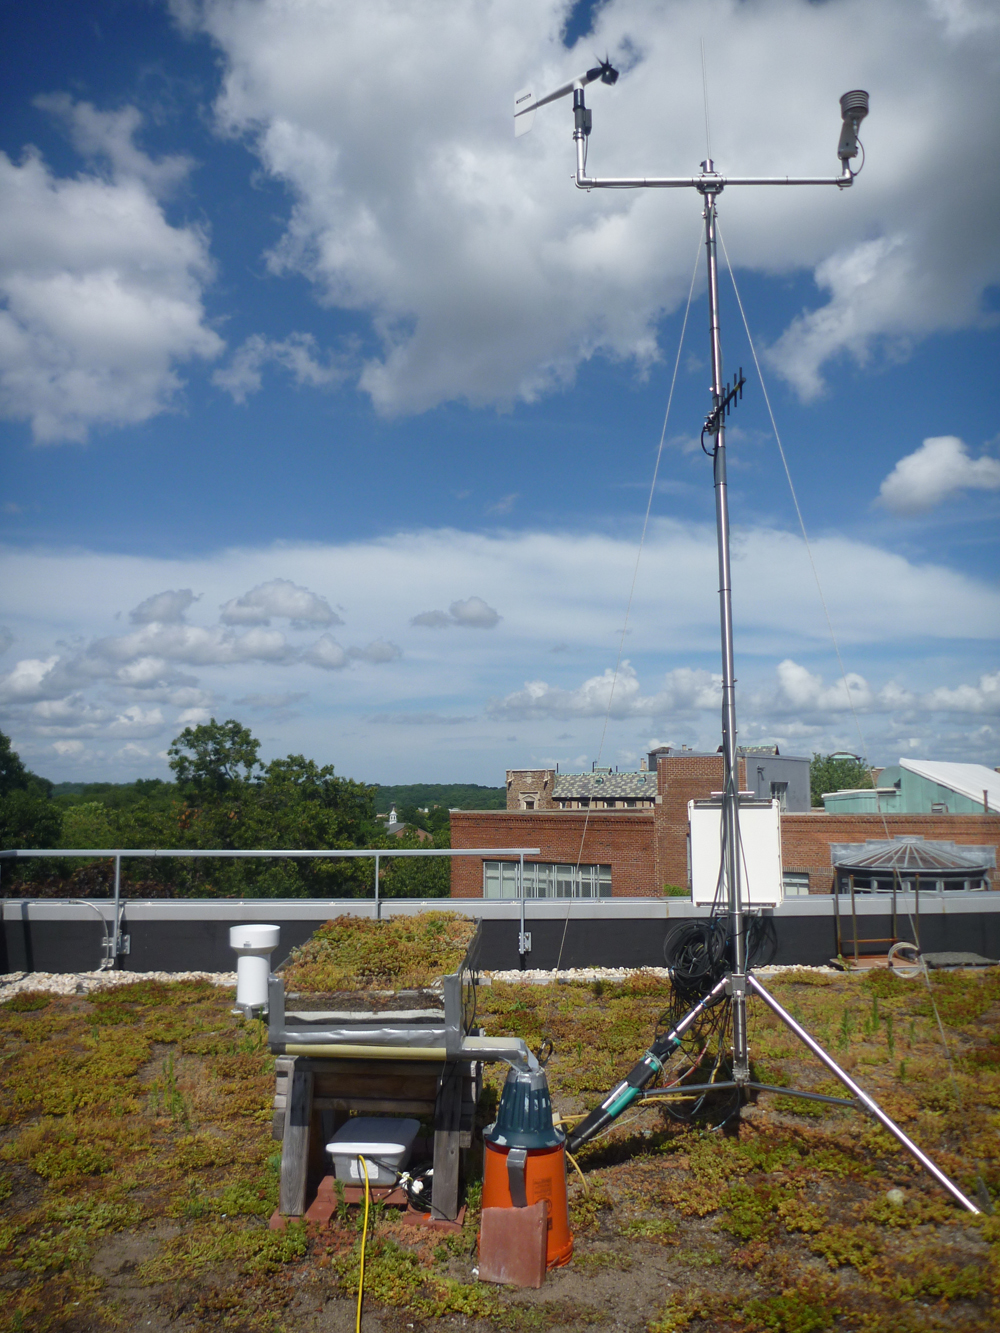 Wind and rain gauges provide climatic data, which is plugged into equations for calculating evapotranspiration. (Credit: Franco Mantalto)